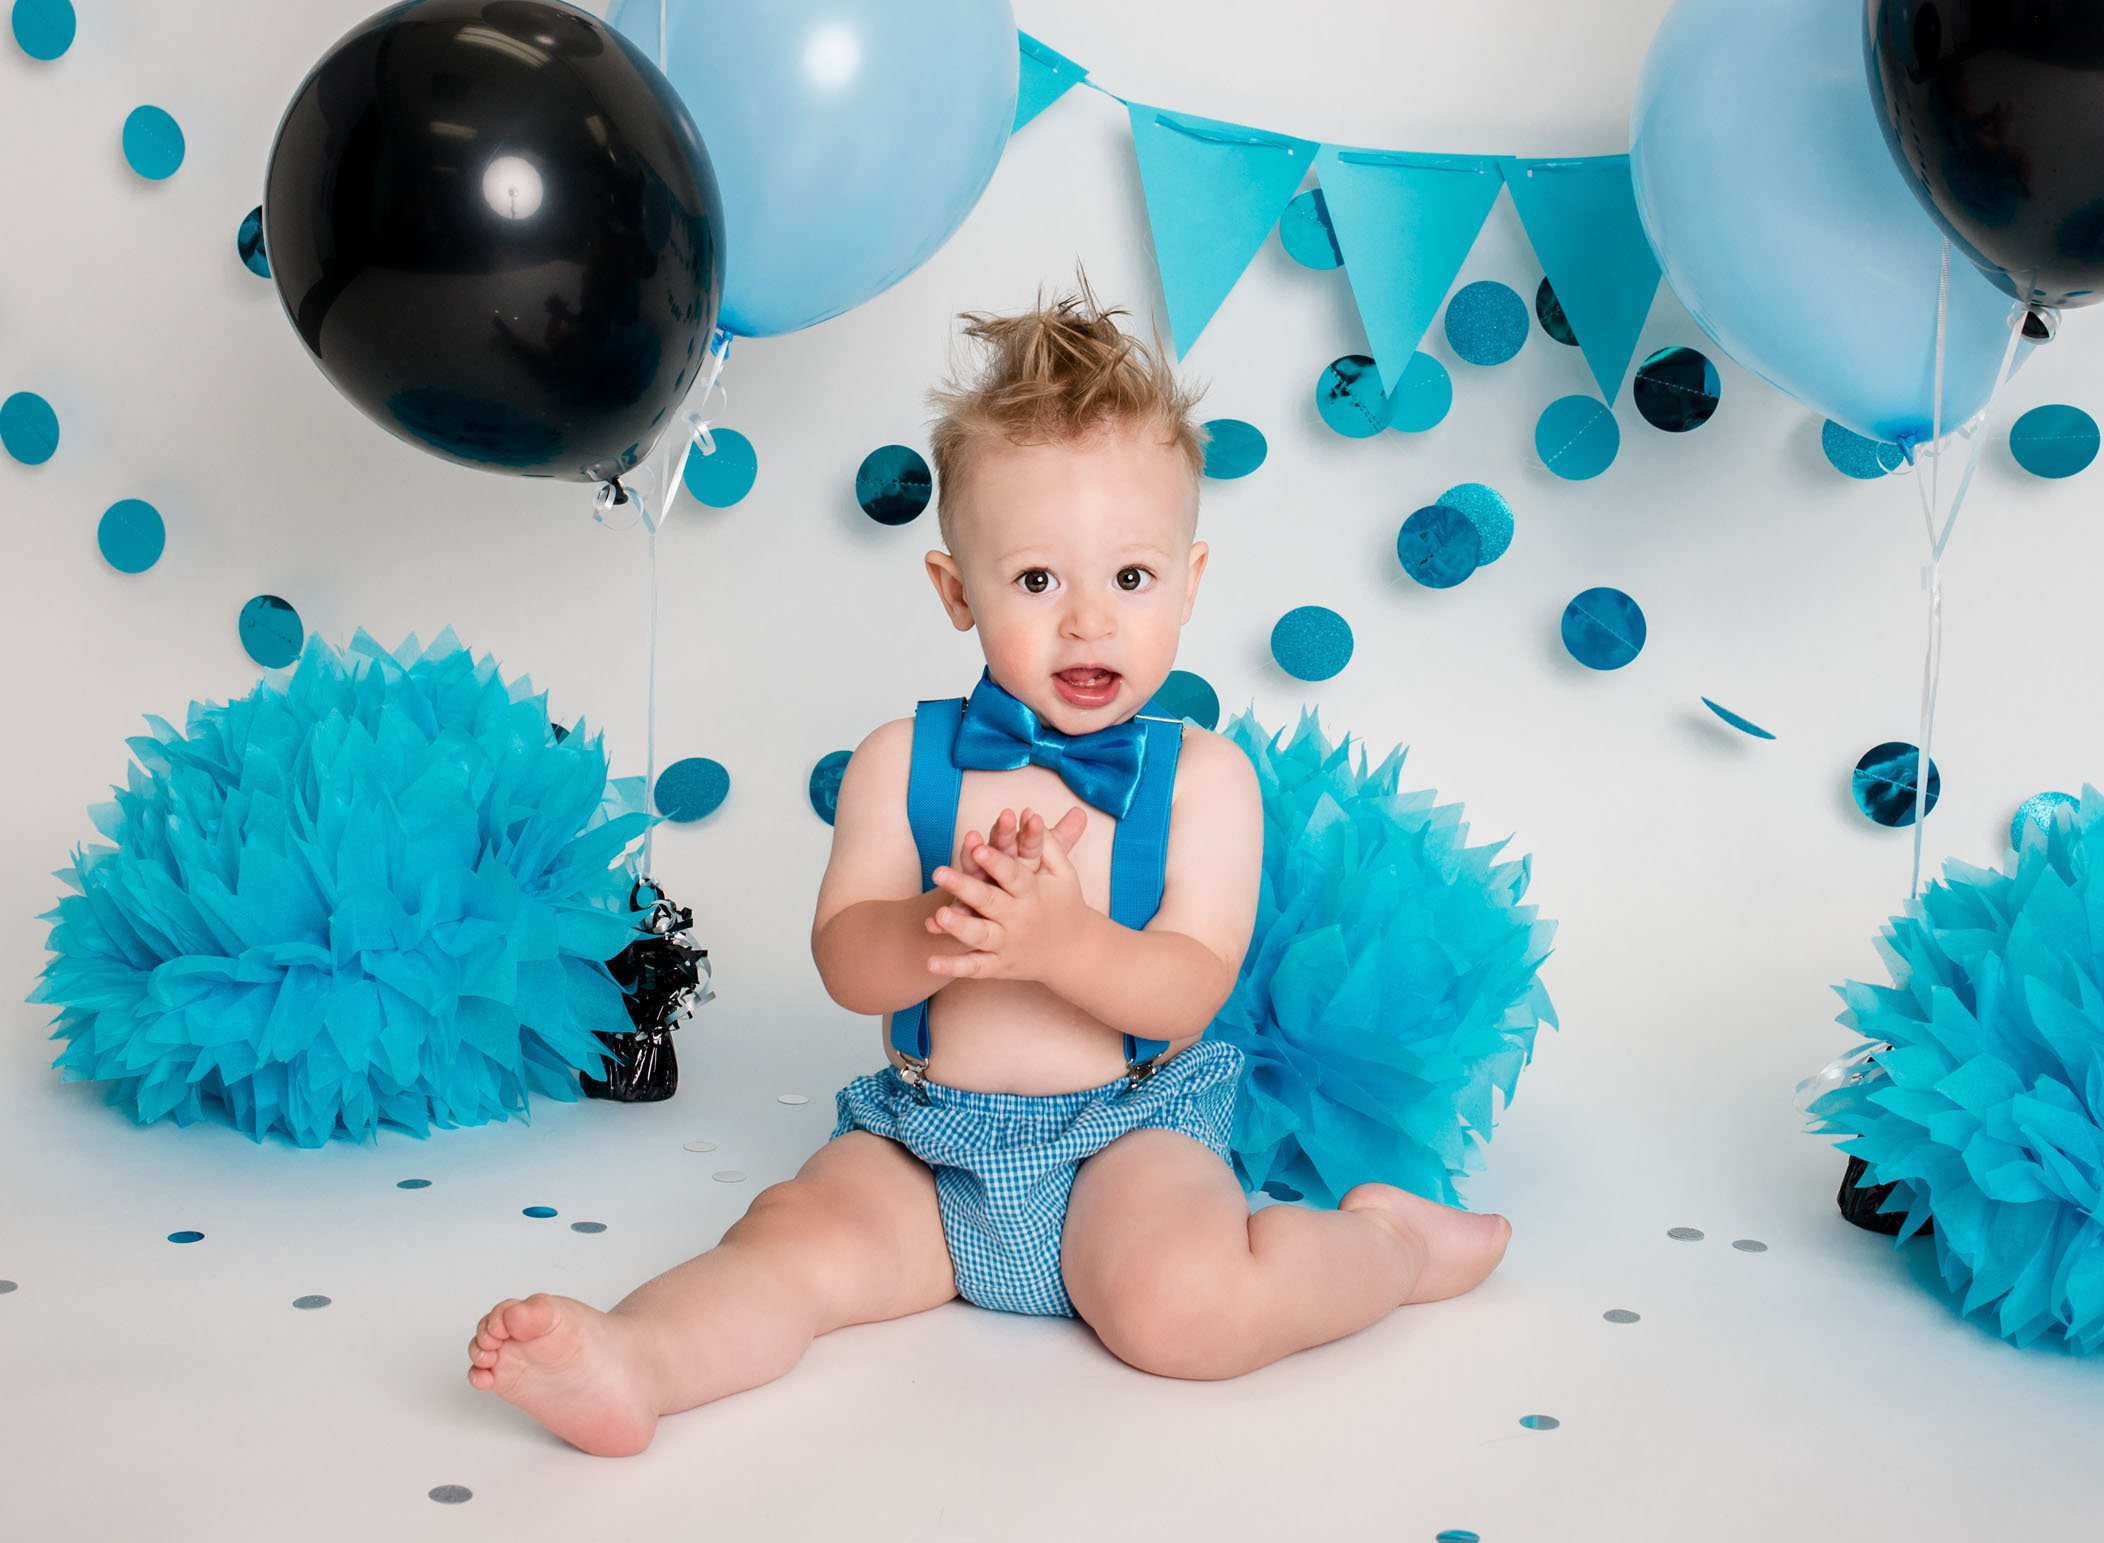 year old boy sitting on white, blue and black decorated backdrop in blue suspenders